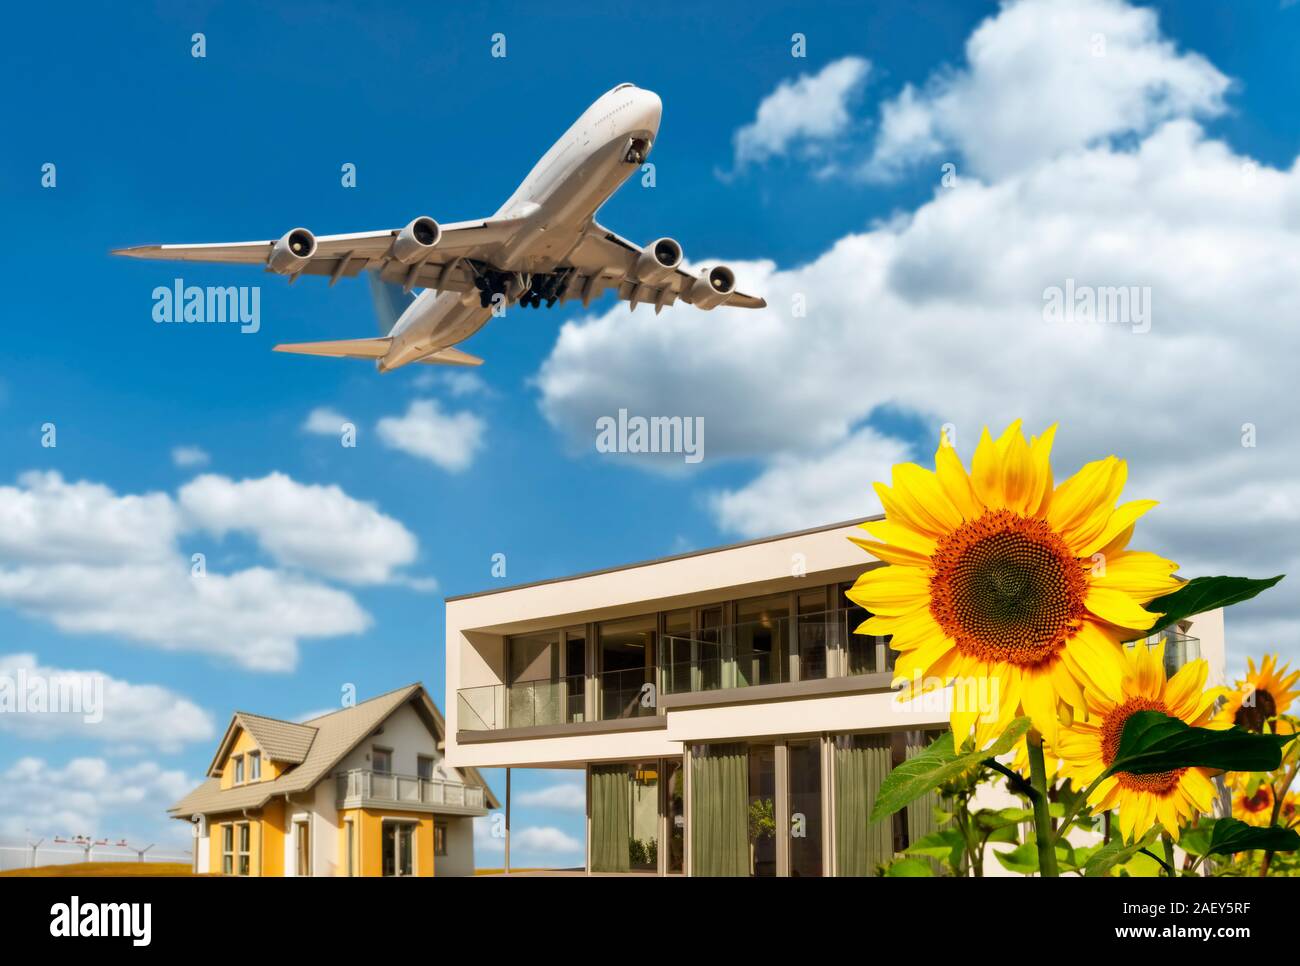 Houses with sunflowers, blue sky, clouds and airplane in the background Stock Photo